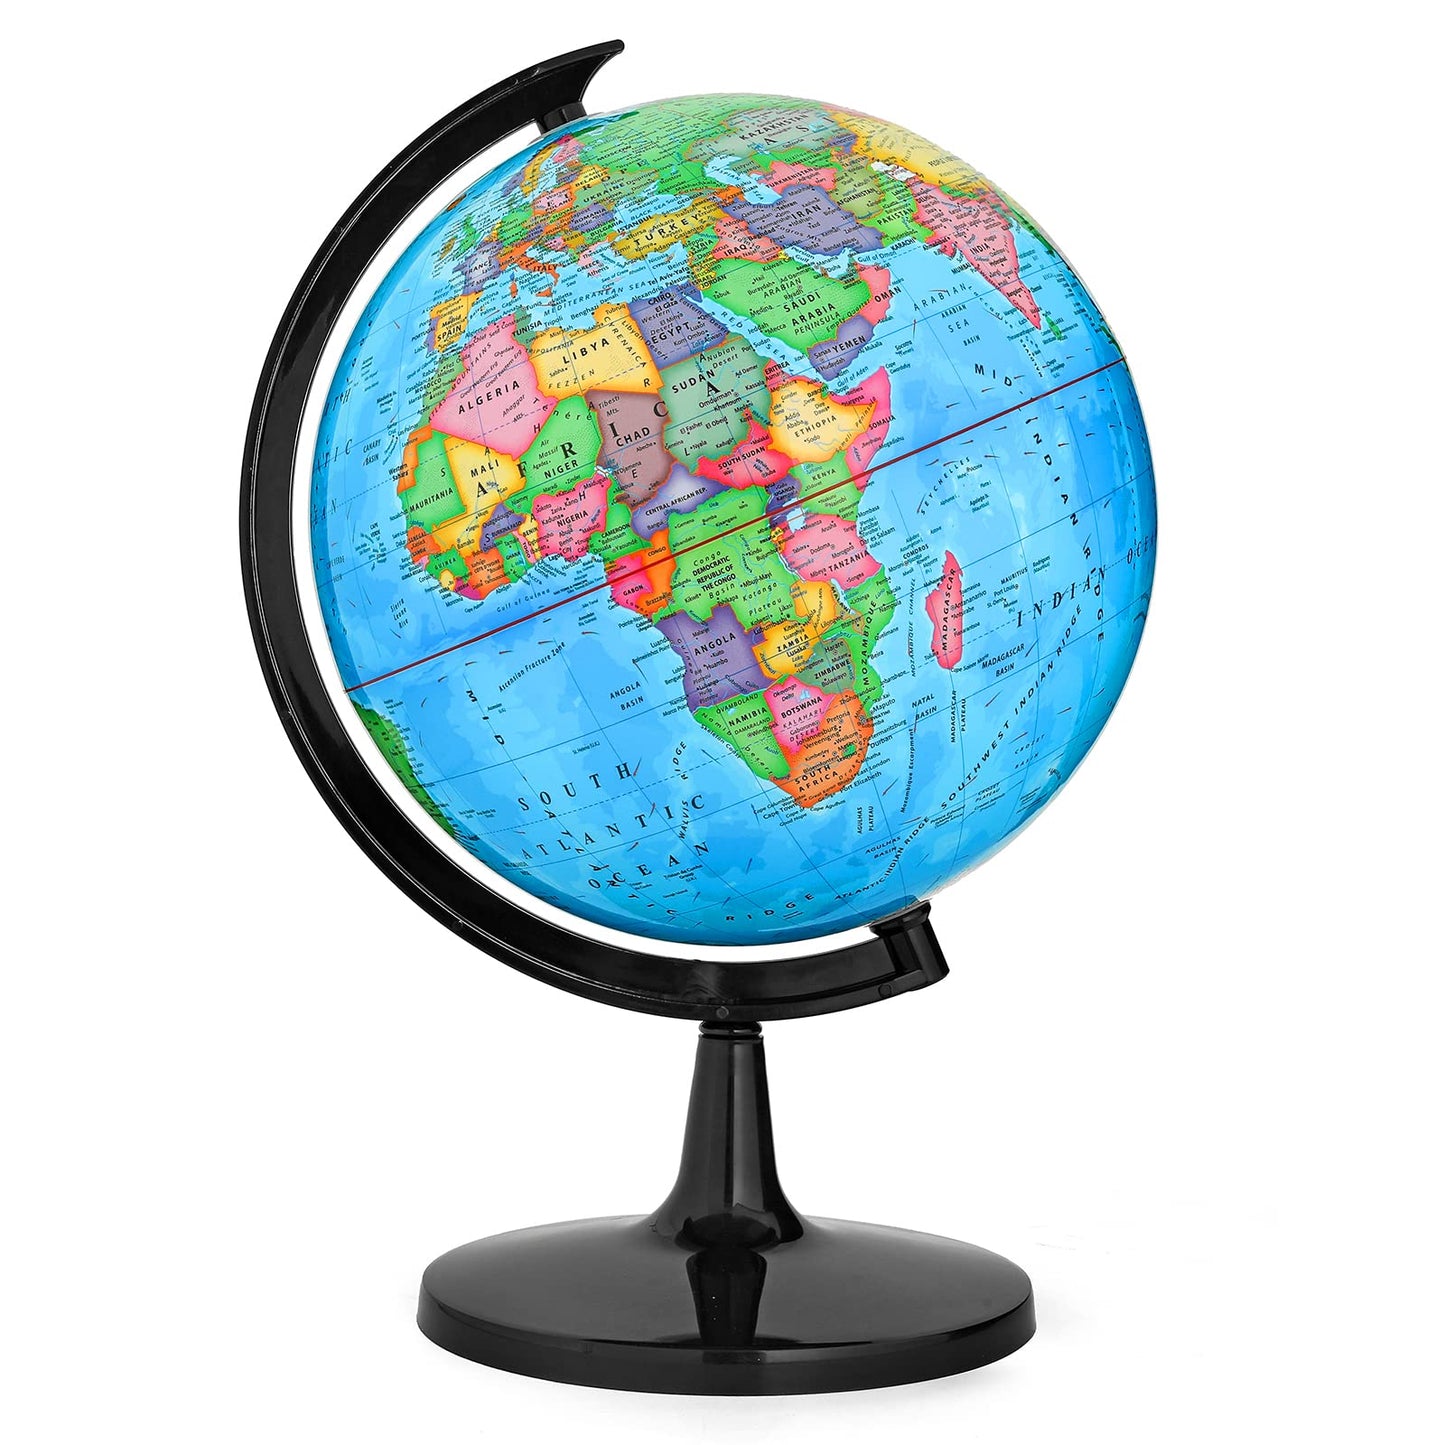 World Globe with Stand, 13" Geography Educational Globe for Students & Teachers, 360° Spinning Globe, Full Length 19.7 inch World Globes for